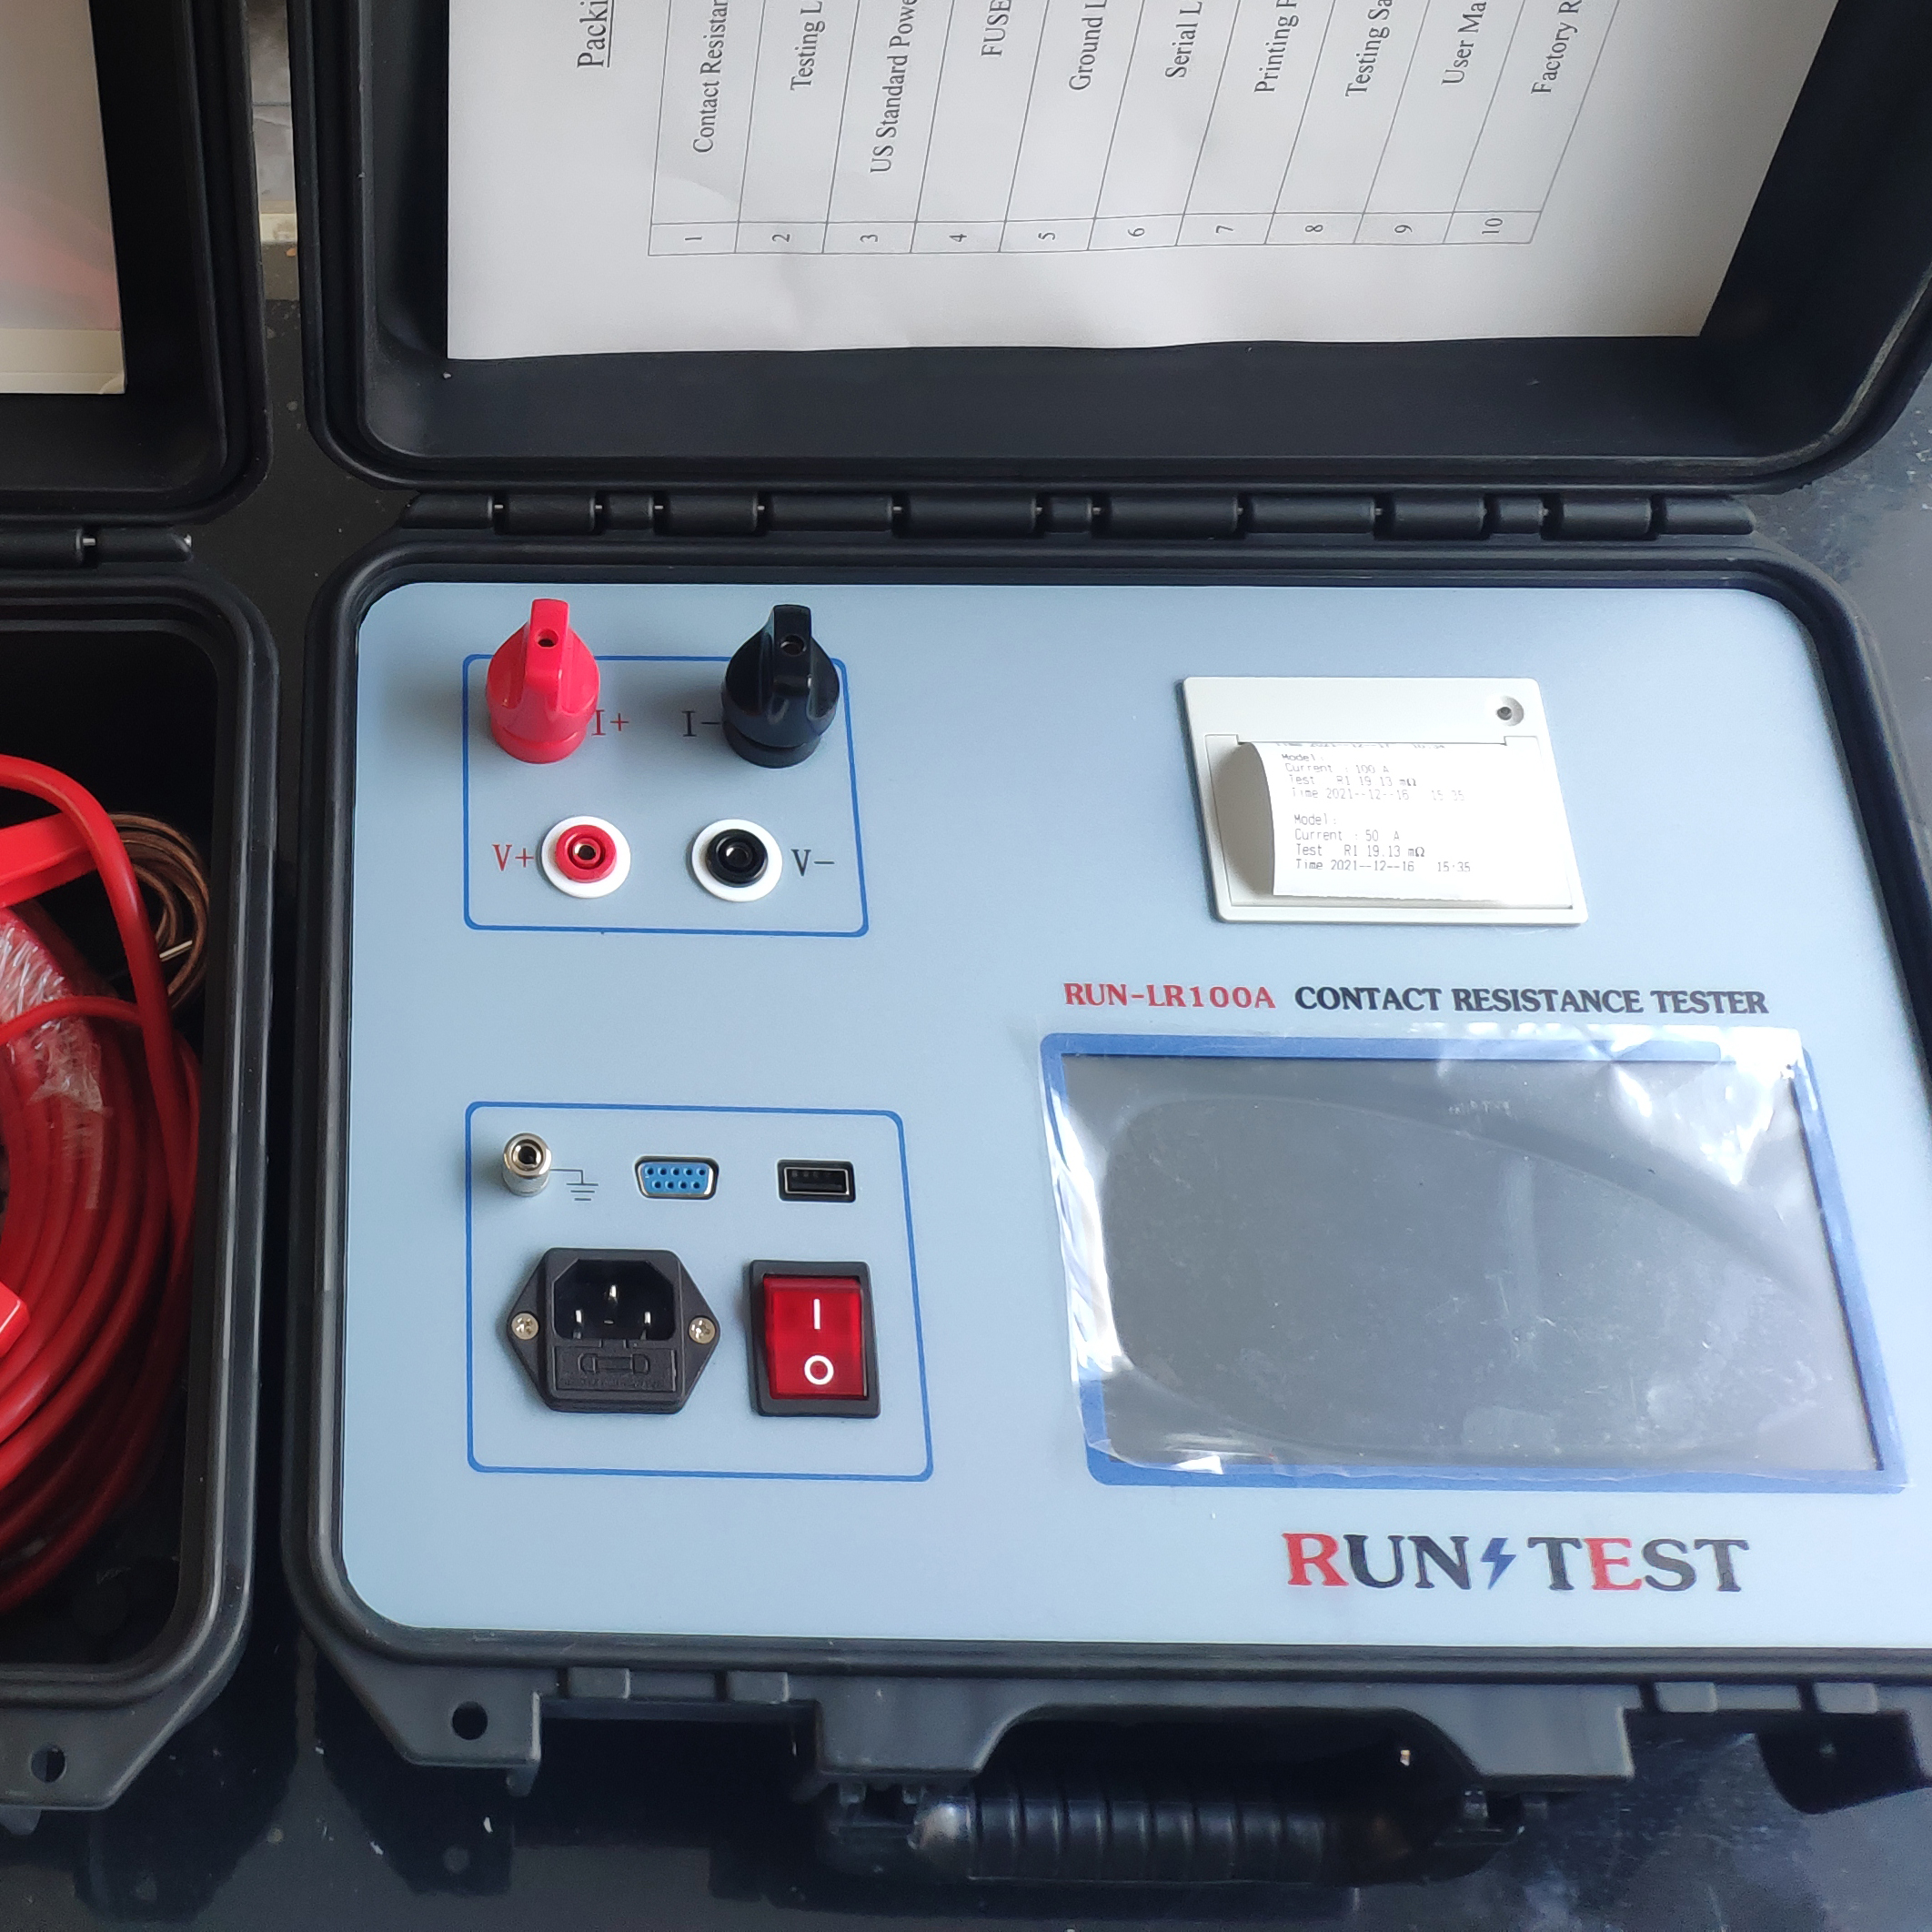 Know more about contact resistance tester